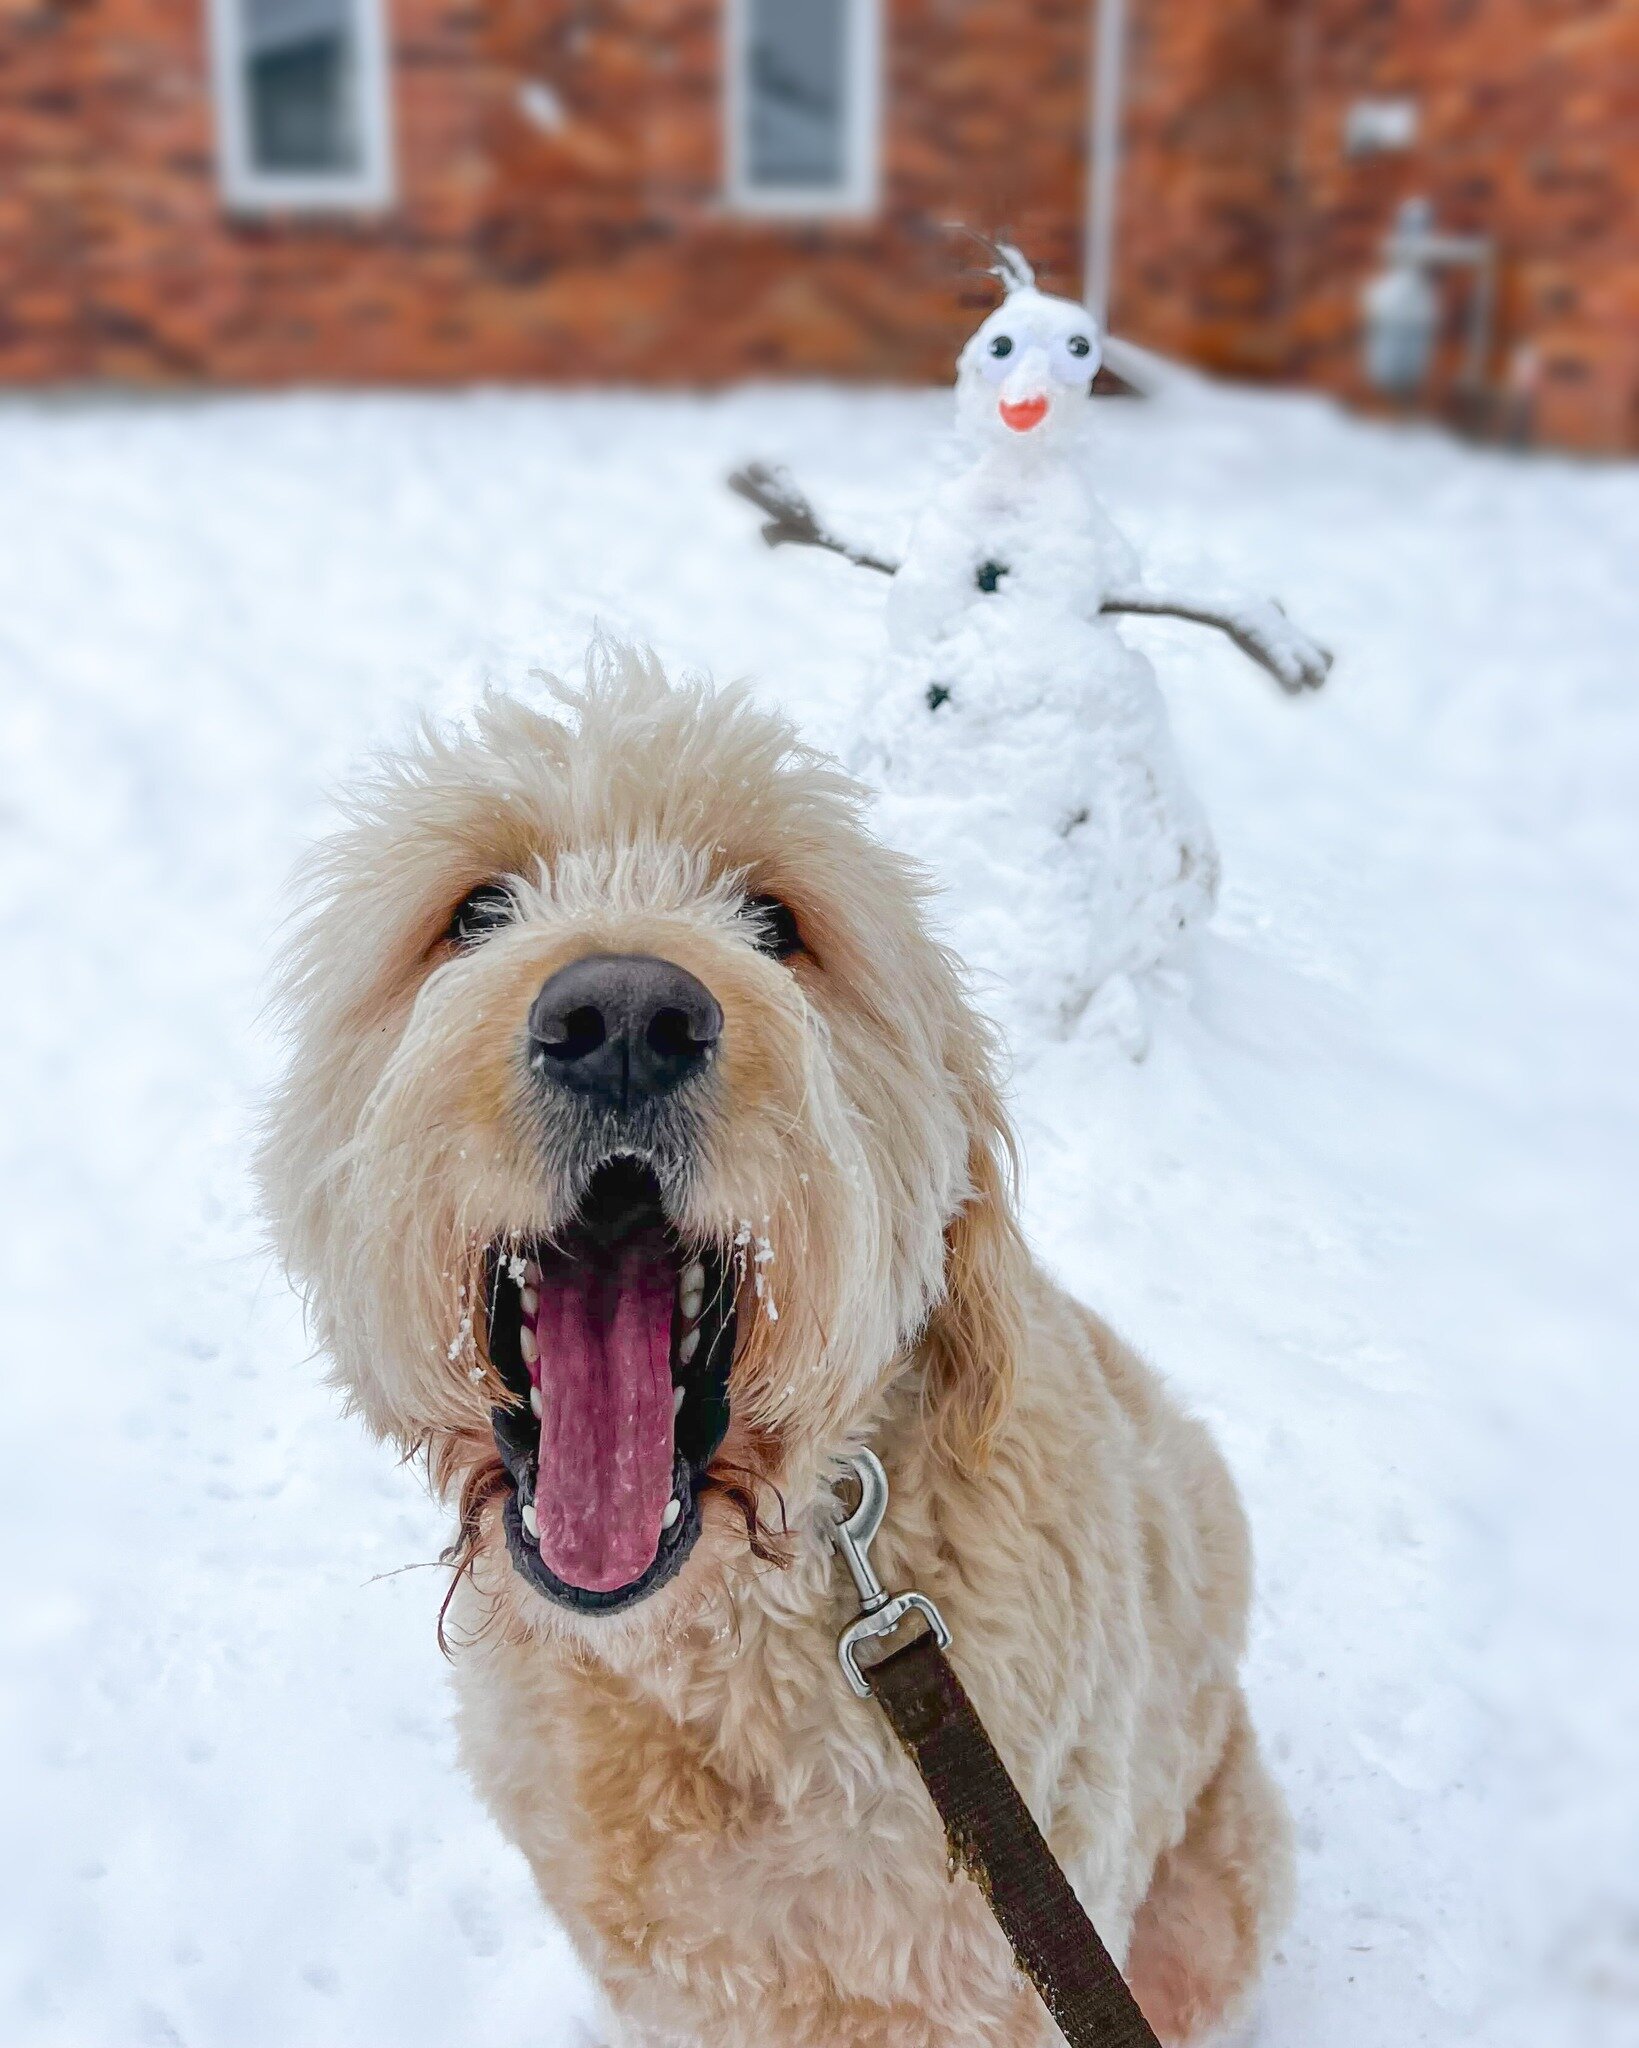 ⛄ As the forecast promises more of the fluffy white stuff, this is your Final Call to gear up your furry sidekick for this Winter season, if you haven't done it already.

🔥 Our Winter Must-Have Gear Guide is your last-minute free ticket to keeping y